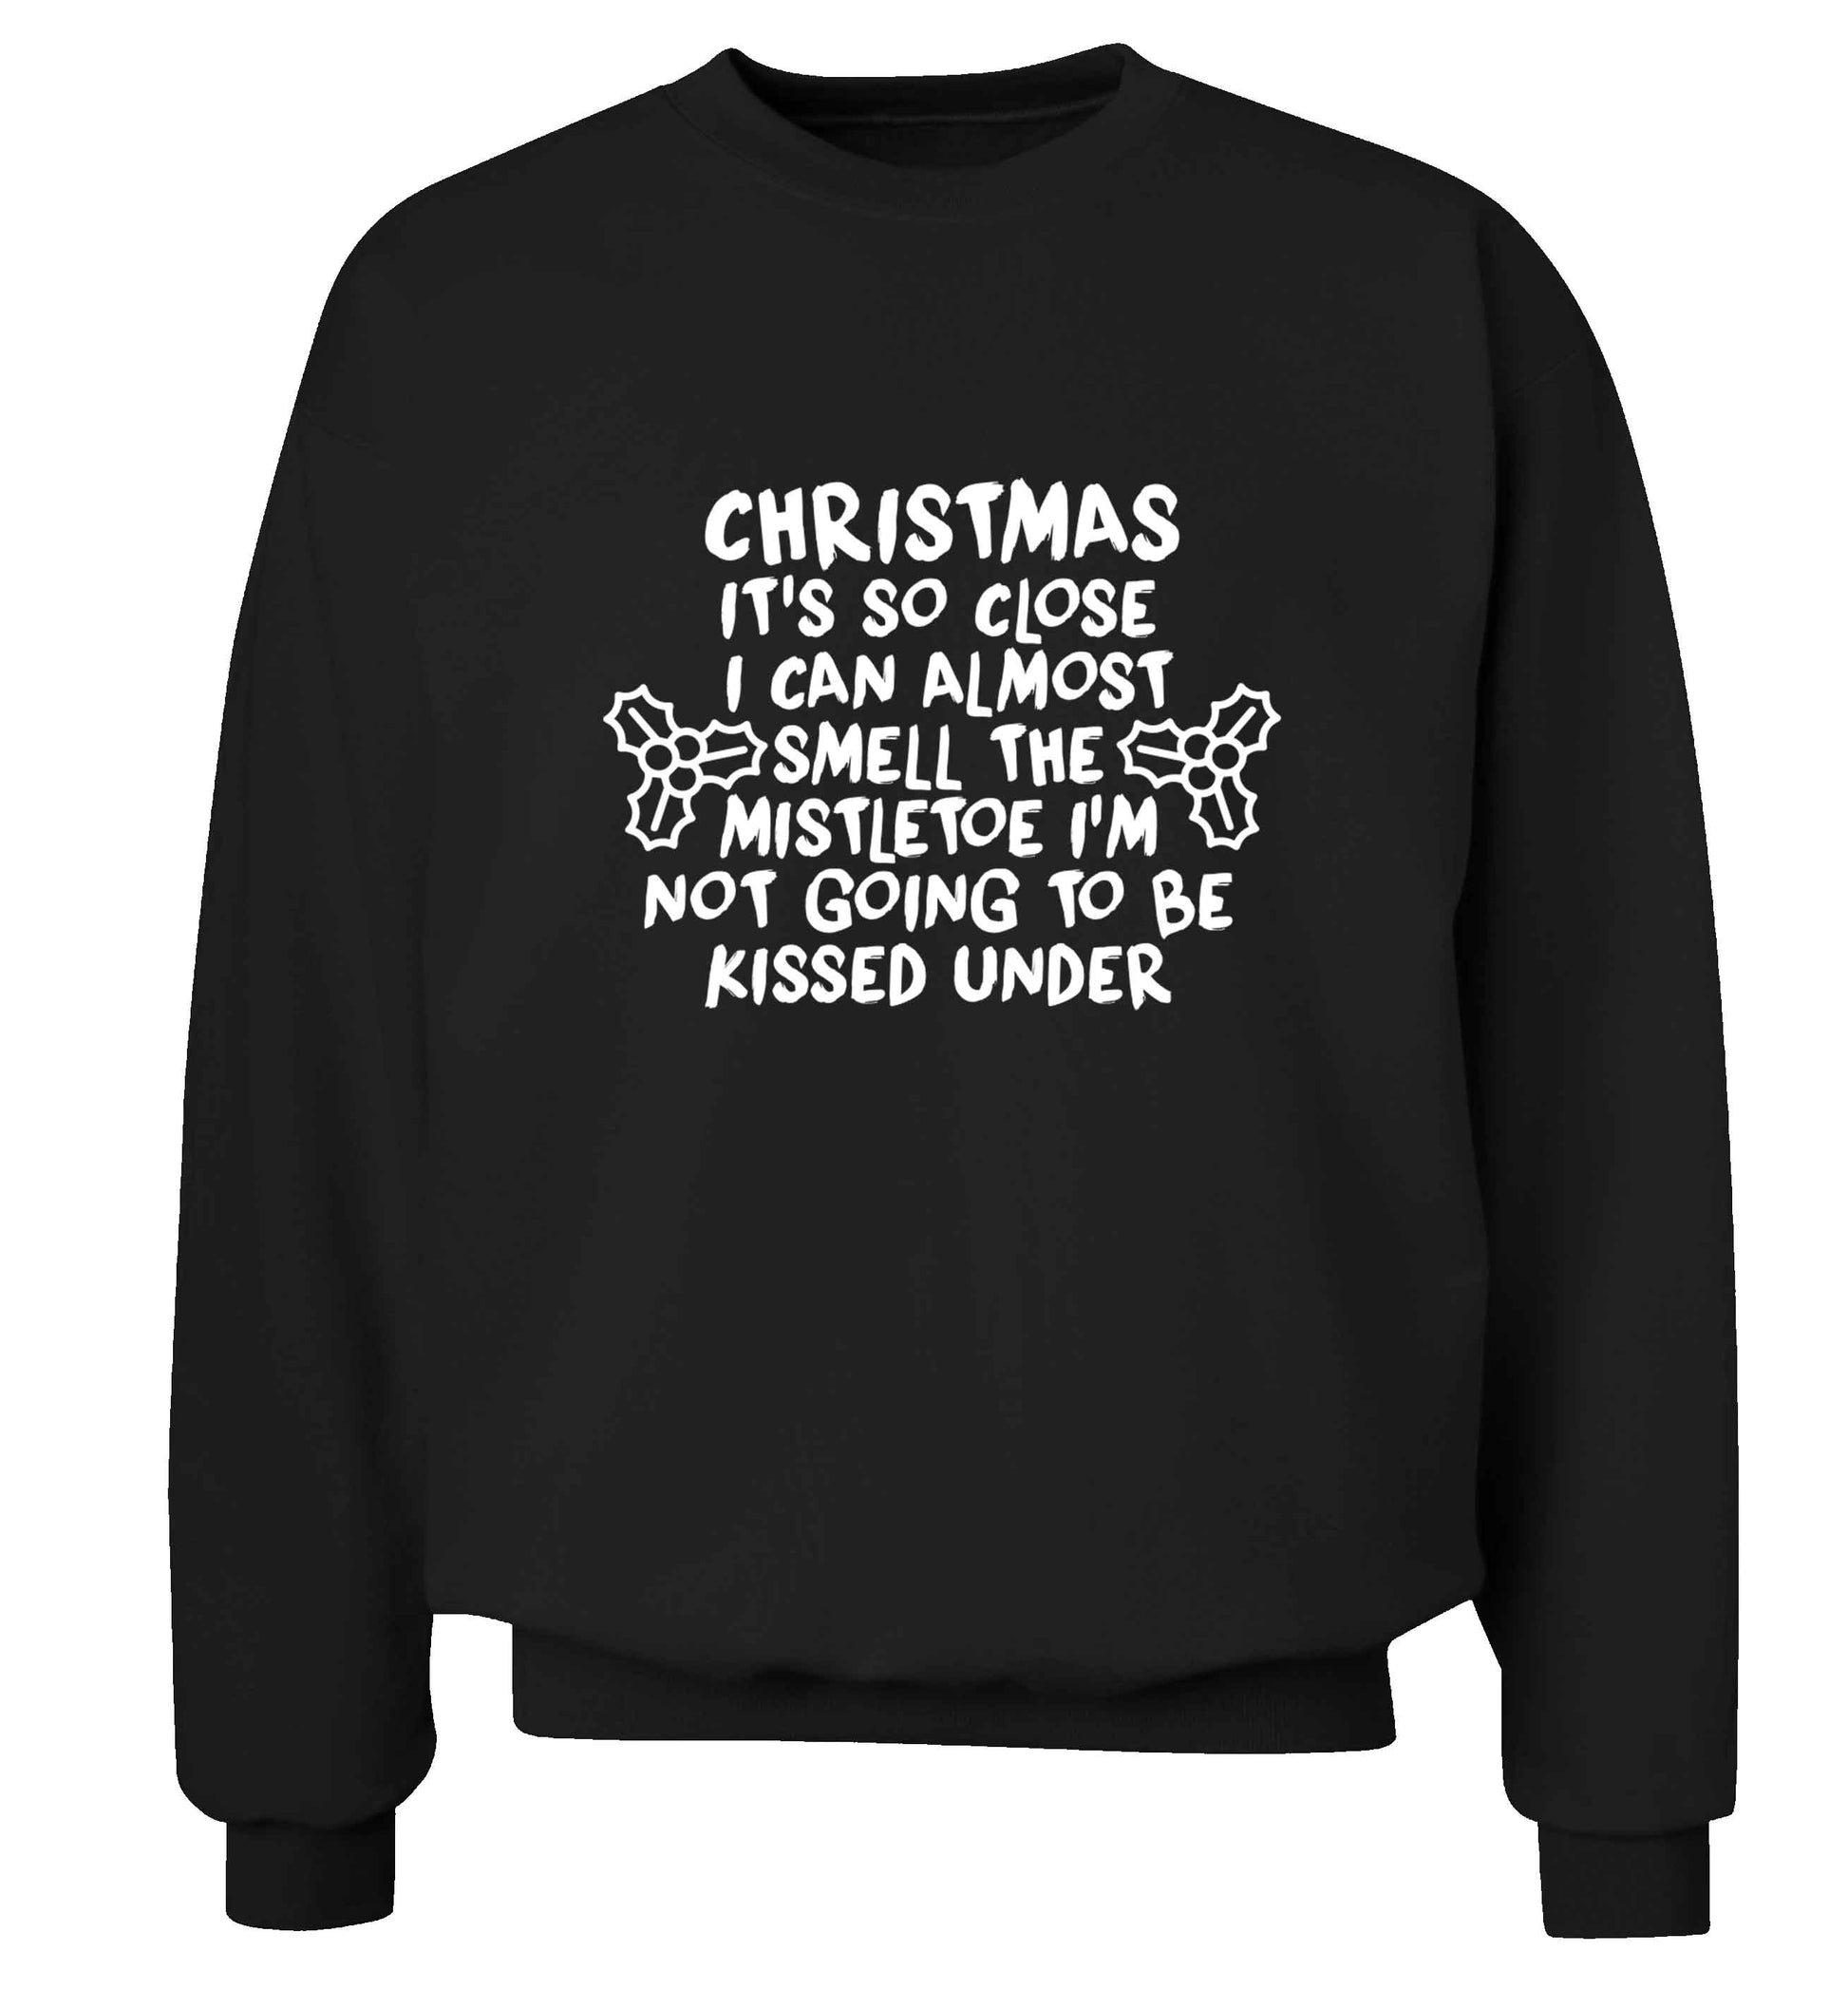 Christmas it's so close I can almost smell the misteltoe I'm not going to be kissed under adult's unisex black sweater 2XL